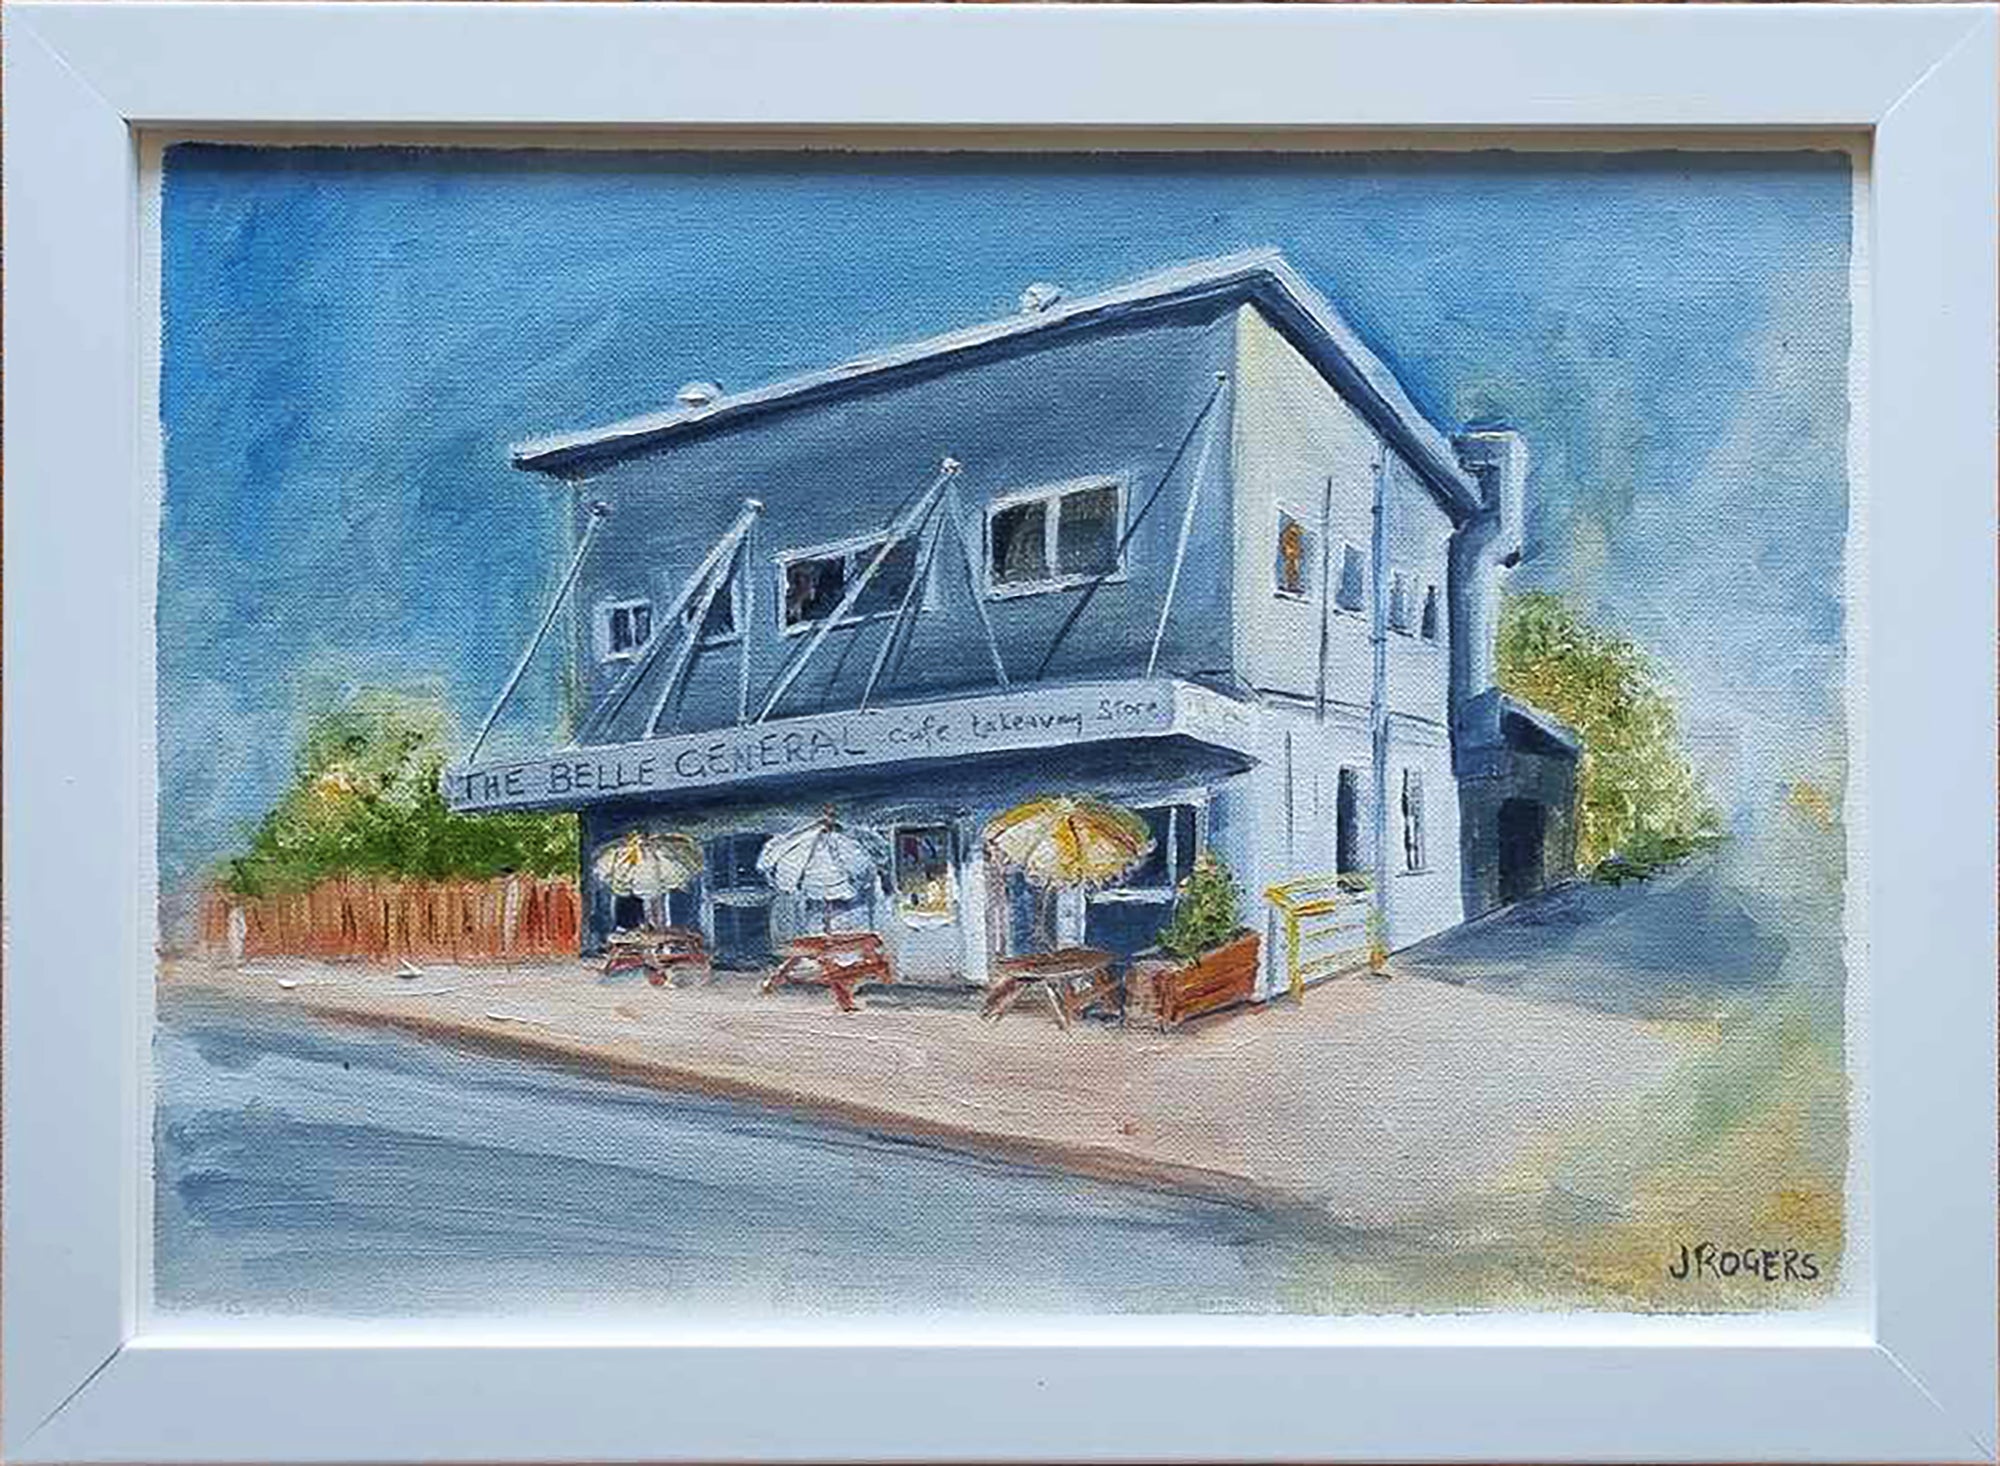 This is a painting of my favourite building and cafes in Ballina, it's at Shelly Beach.  The Belle General has great coffee, muffins and atmosphere.  The building has a story, its special and probably has an amazing history and it's my 3rd time painting the Belle from Australian Artist Jenni Rogers